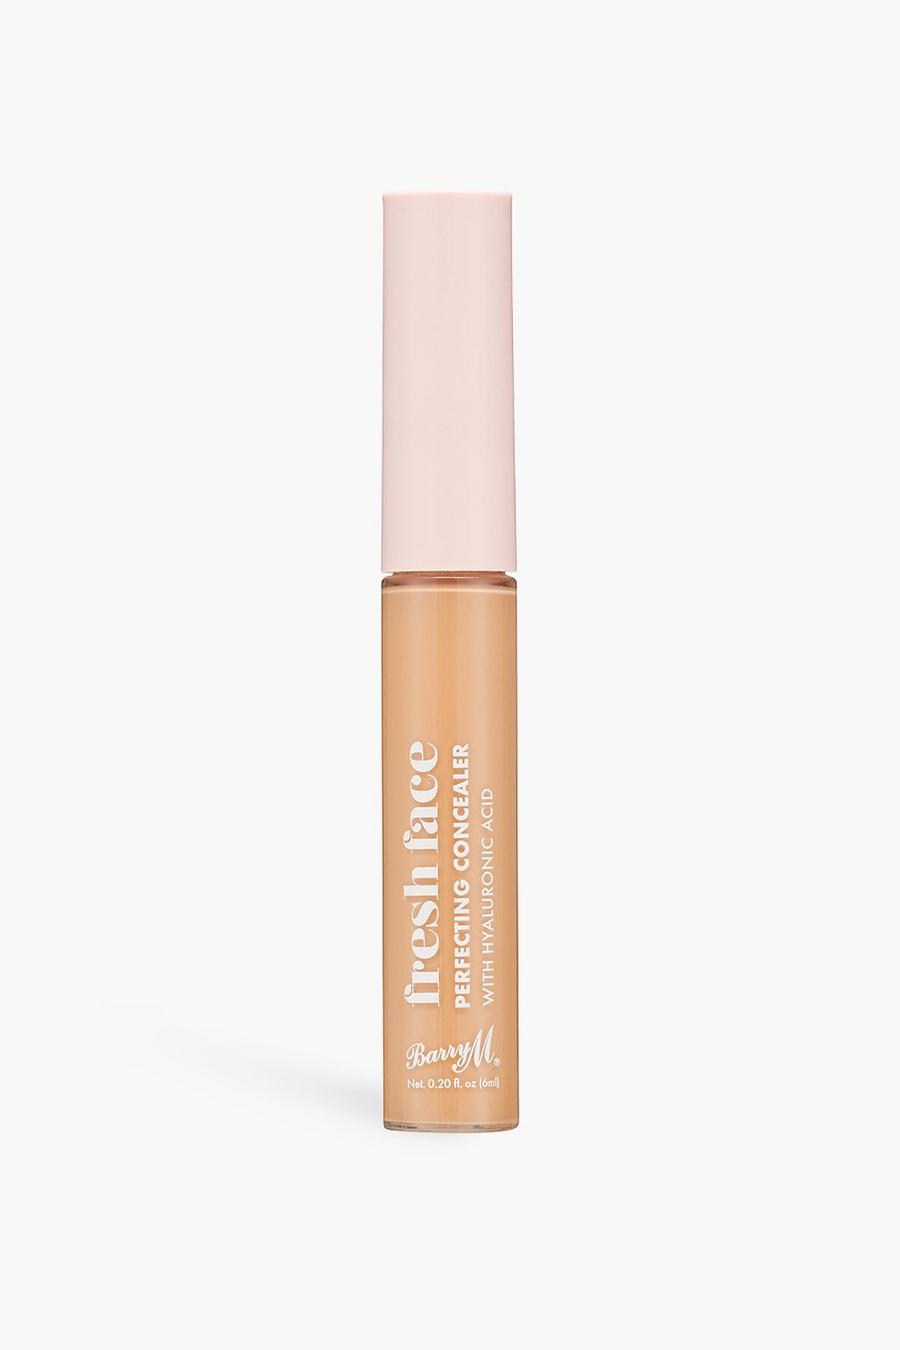 Tan marrone Fresh Face Perfecting Concealer – קונסילר 7 של Barry M